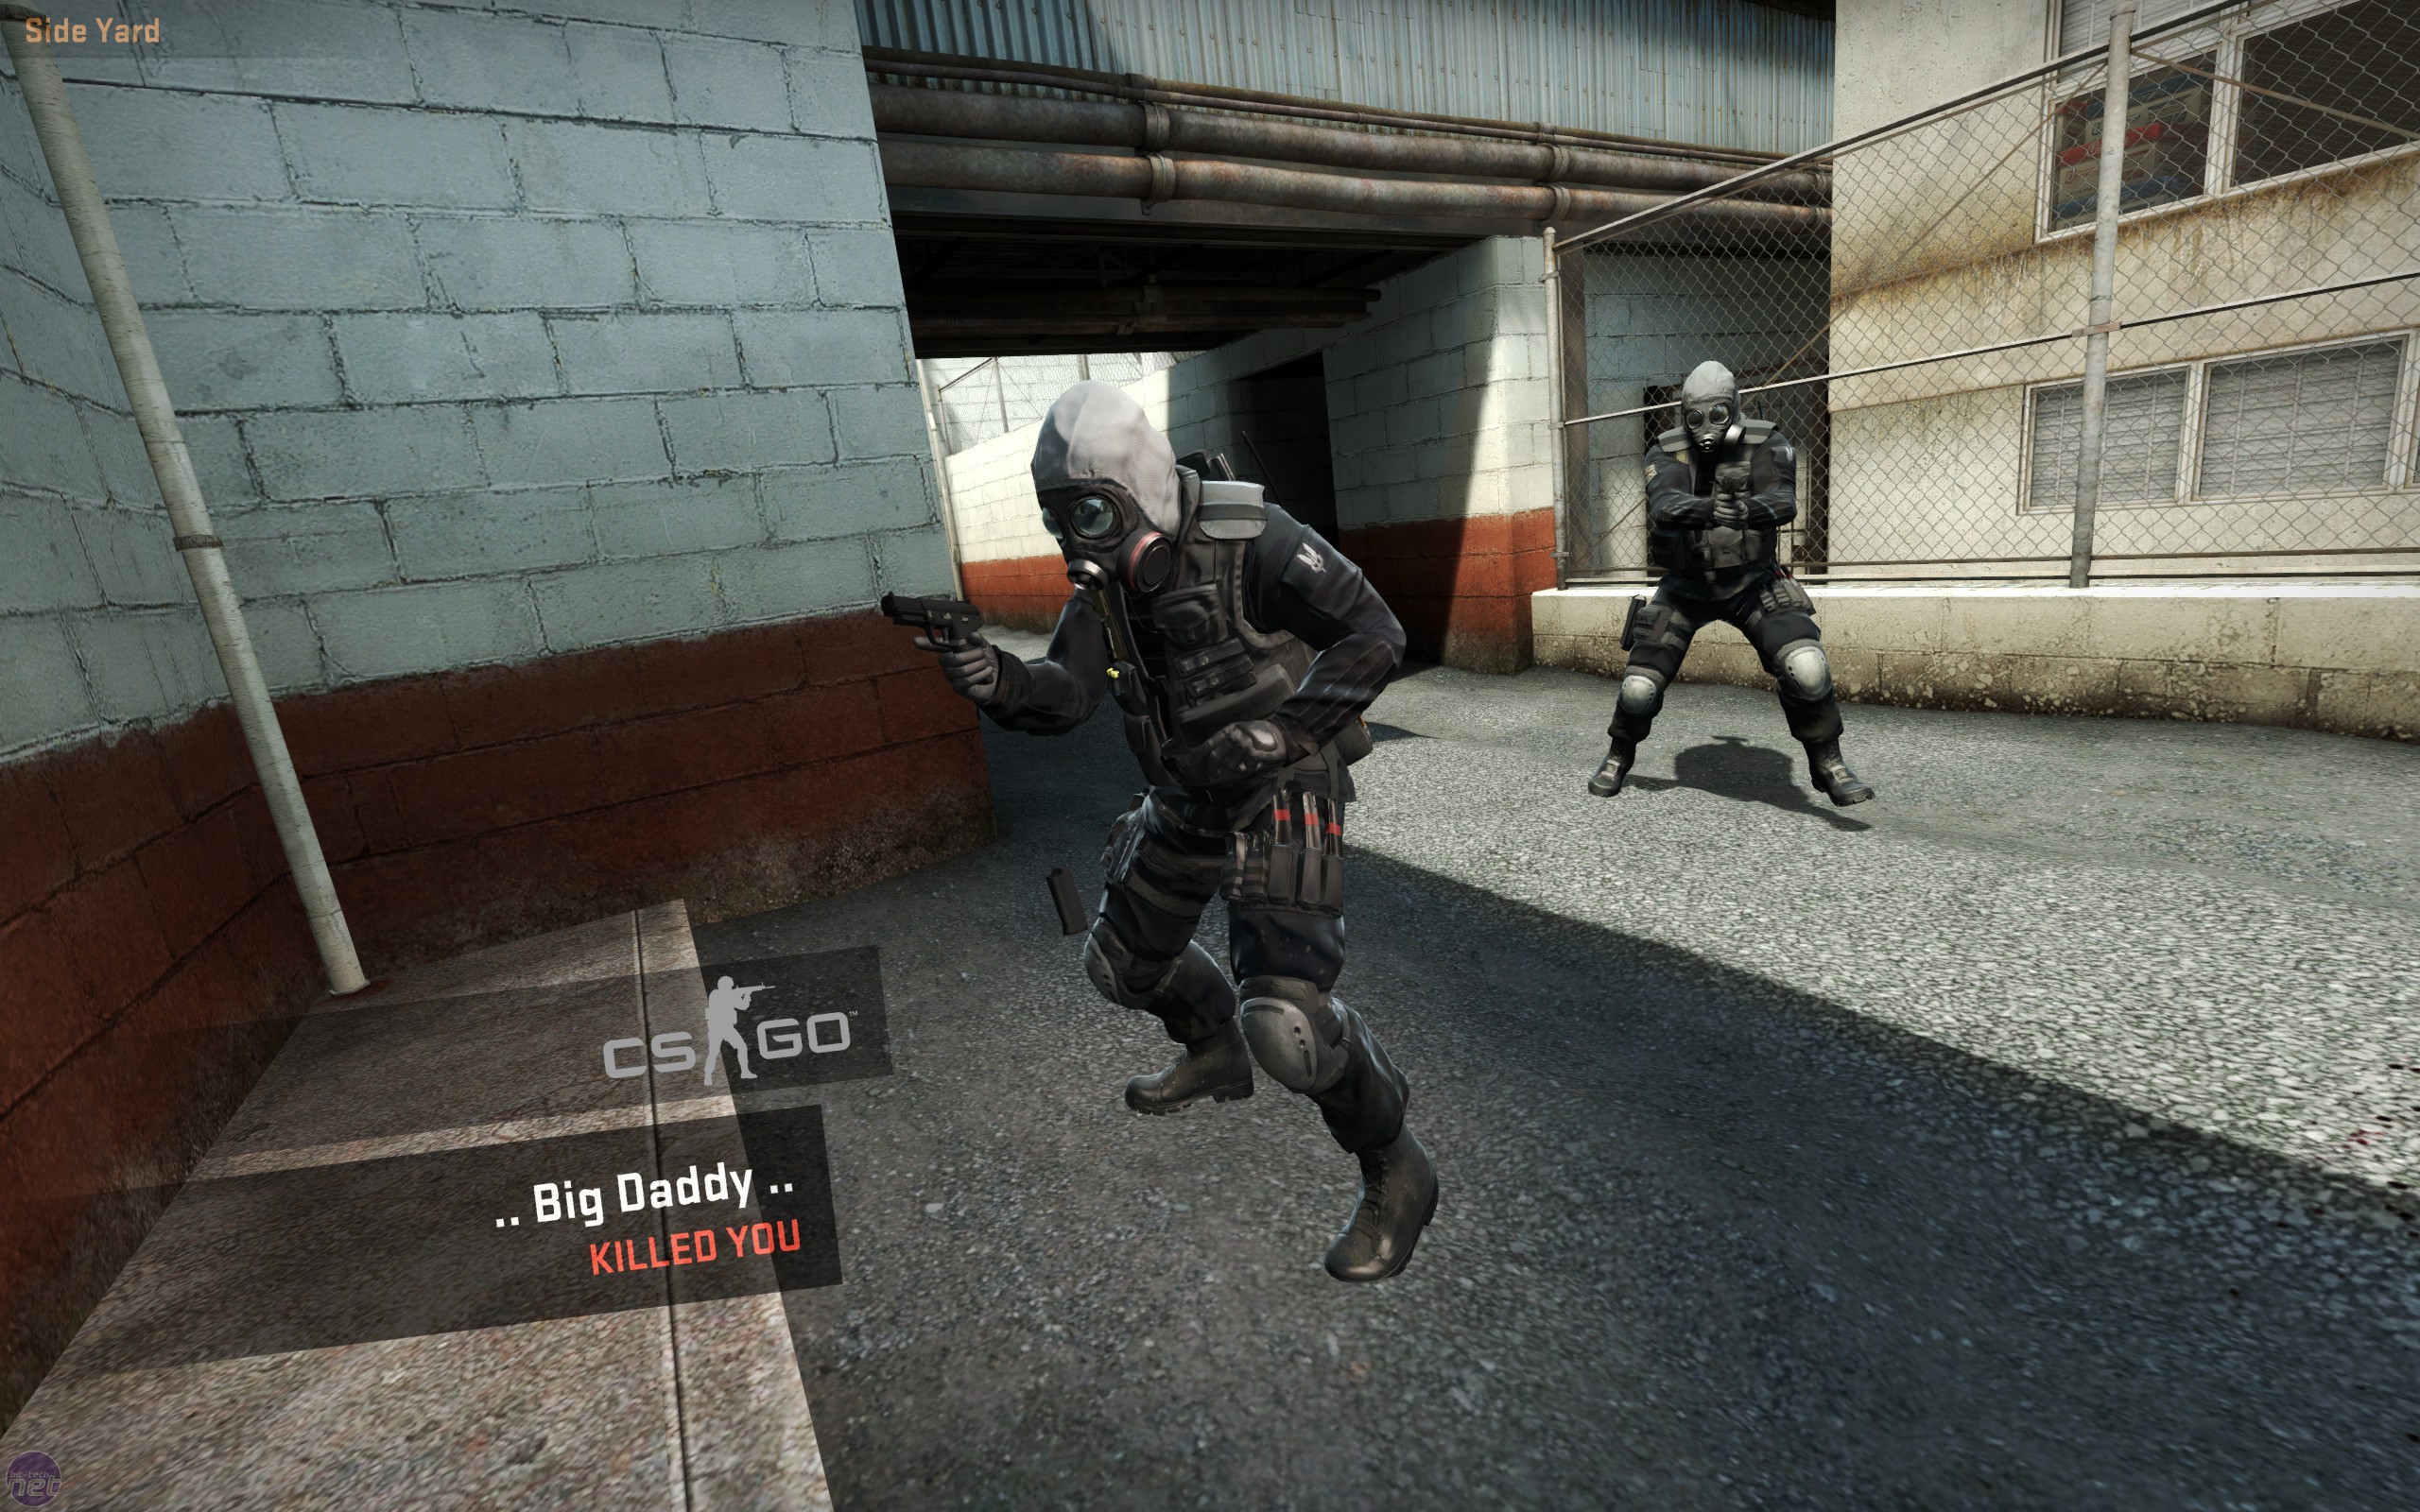 Counter-Strike: Global Offensive review